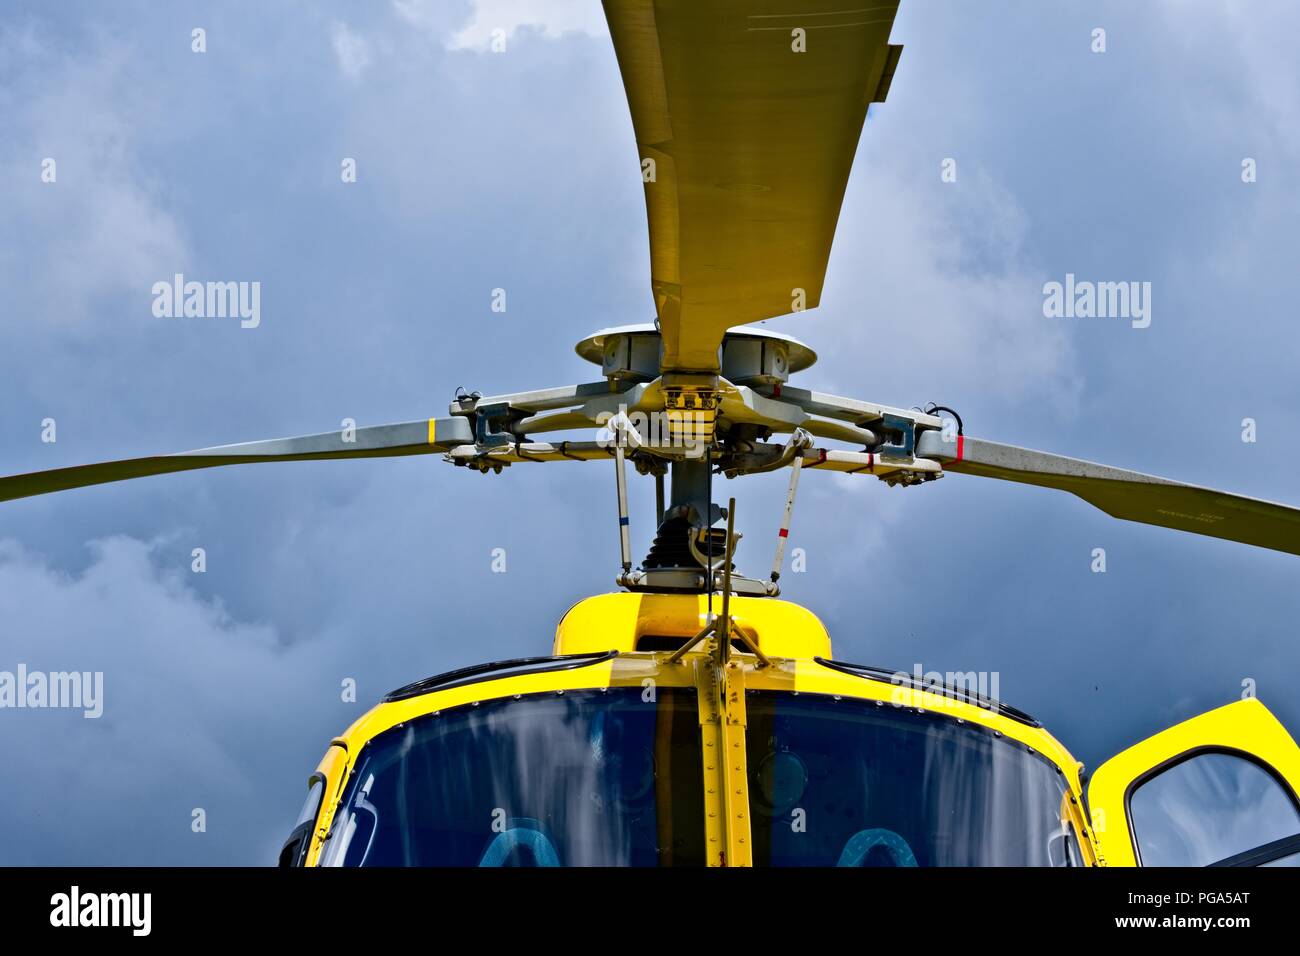 Yellow helicopter close up on the rotors. Air Vehicle, Built Structure, Gold, Helicopter, Manufactured Object Stock Photo